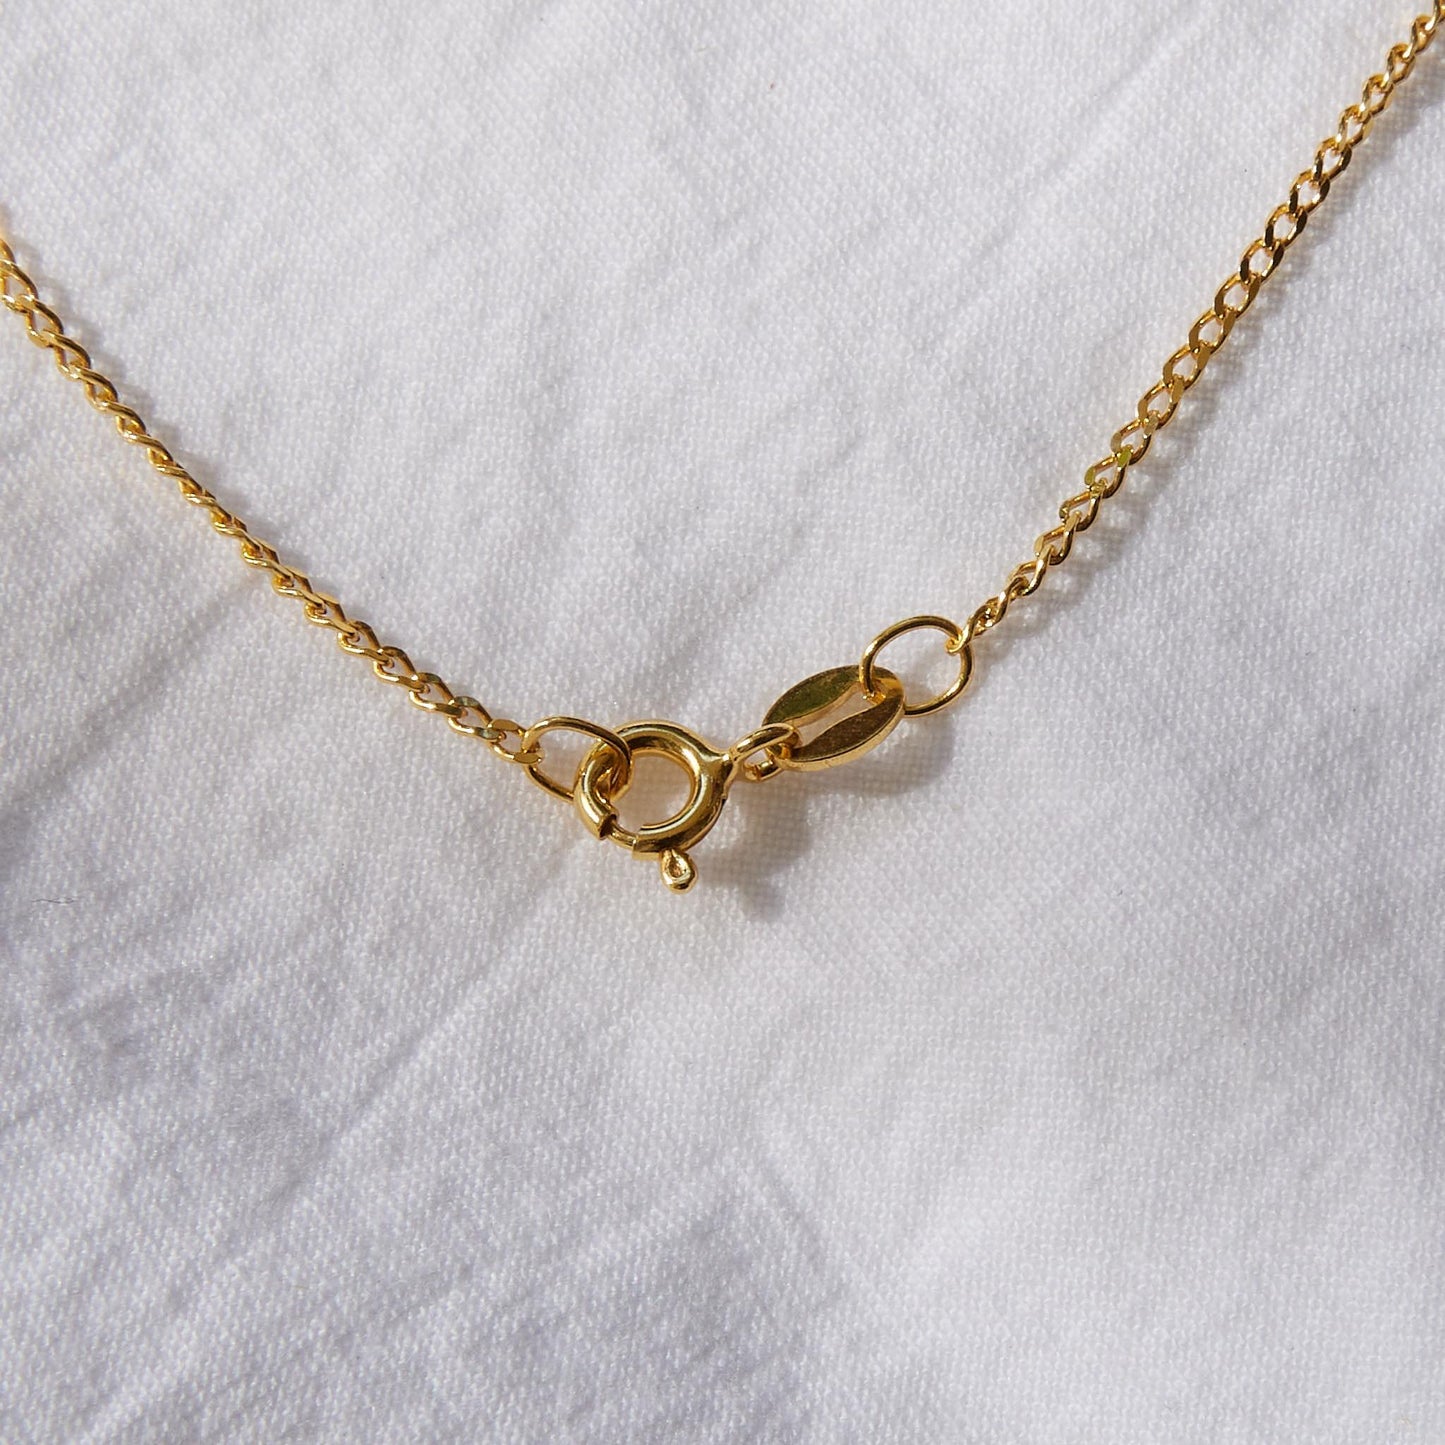 Babe 24k Gold plated sterling silver necklace